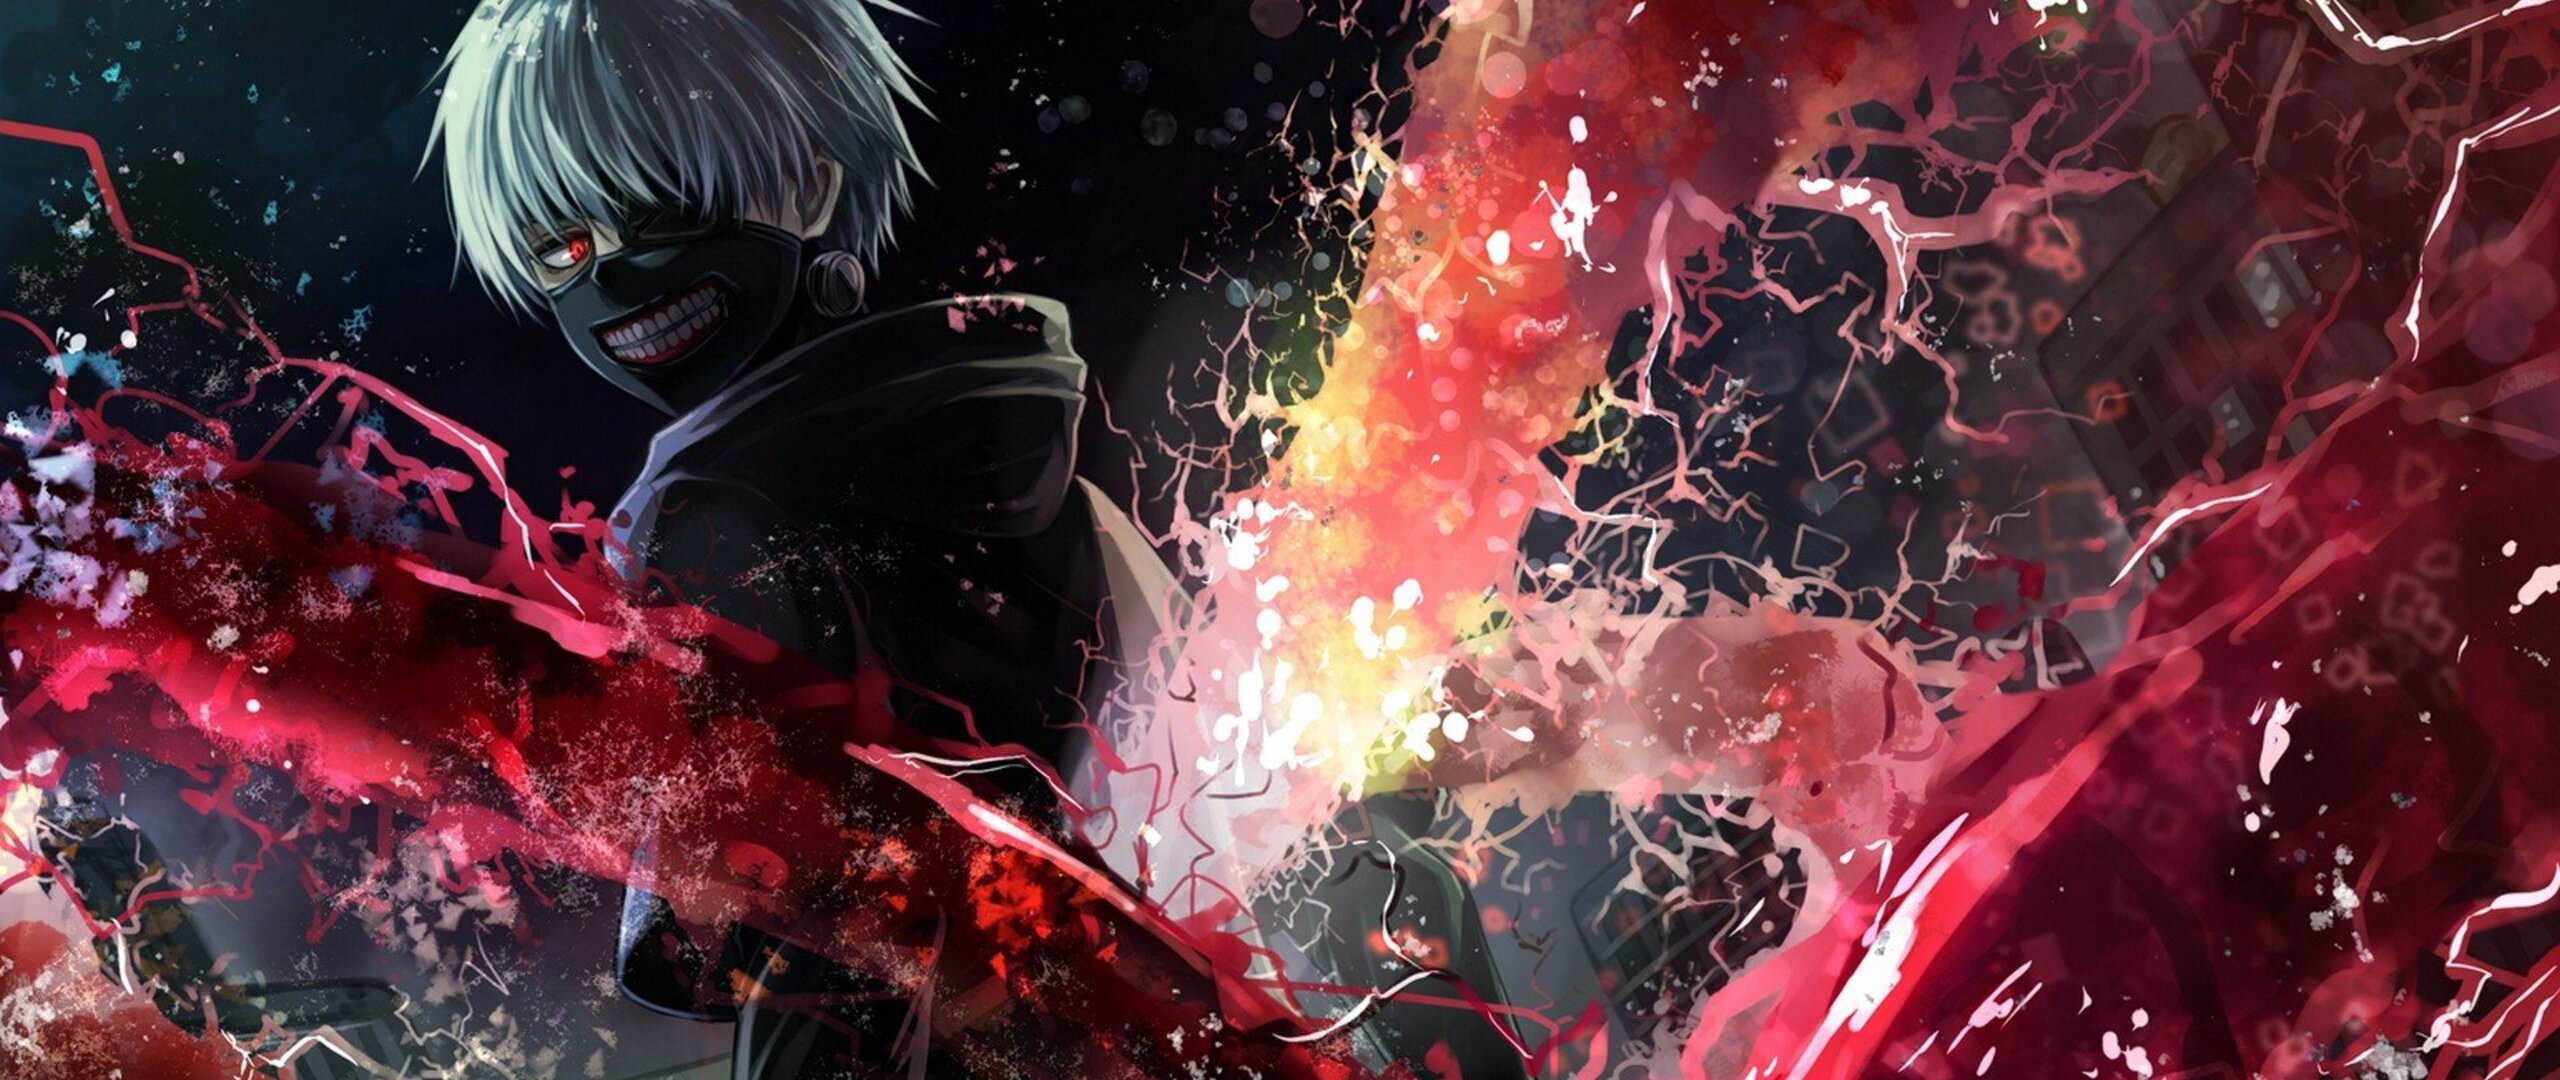 tokyo ghoul wallpaper 1080x1920,action adventure game,cg artwork,fictional character,illustration,games